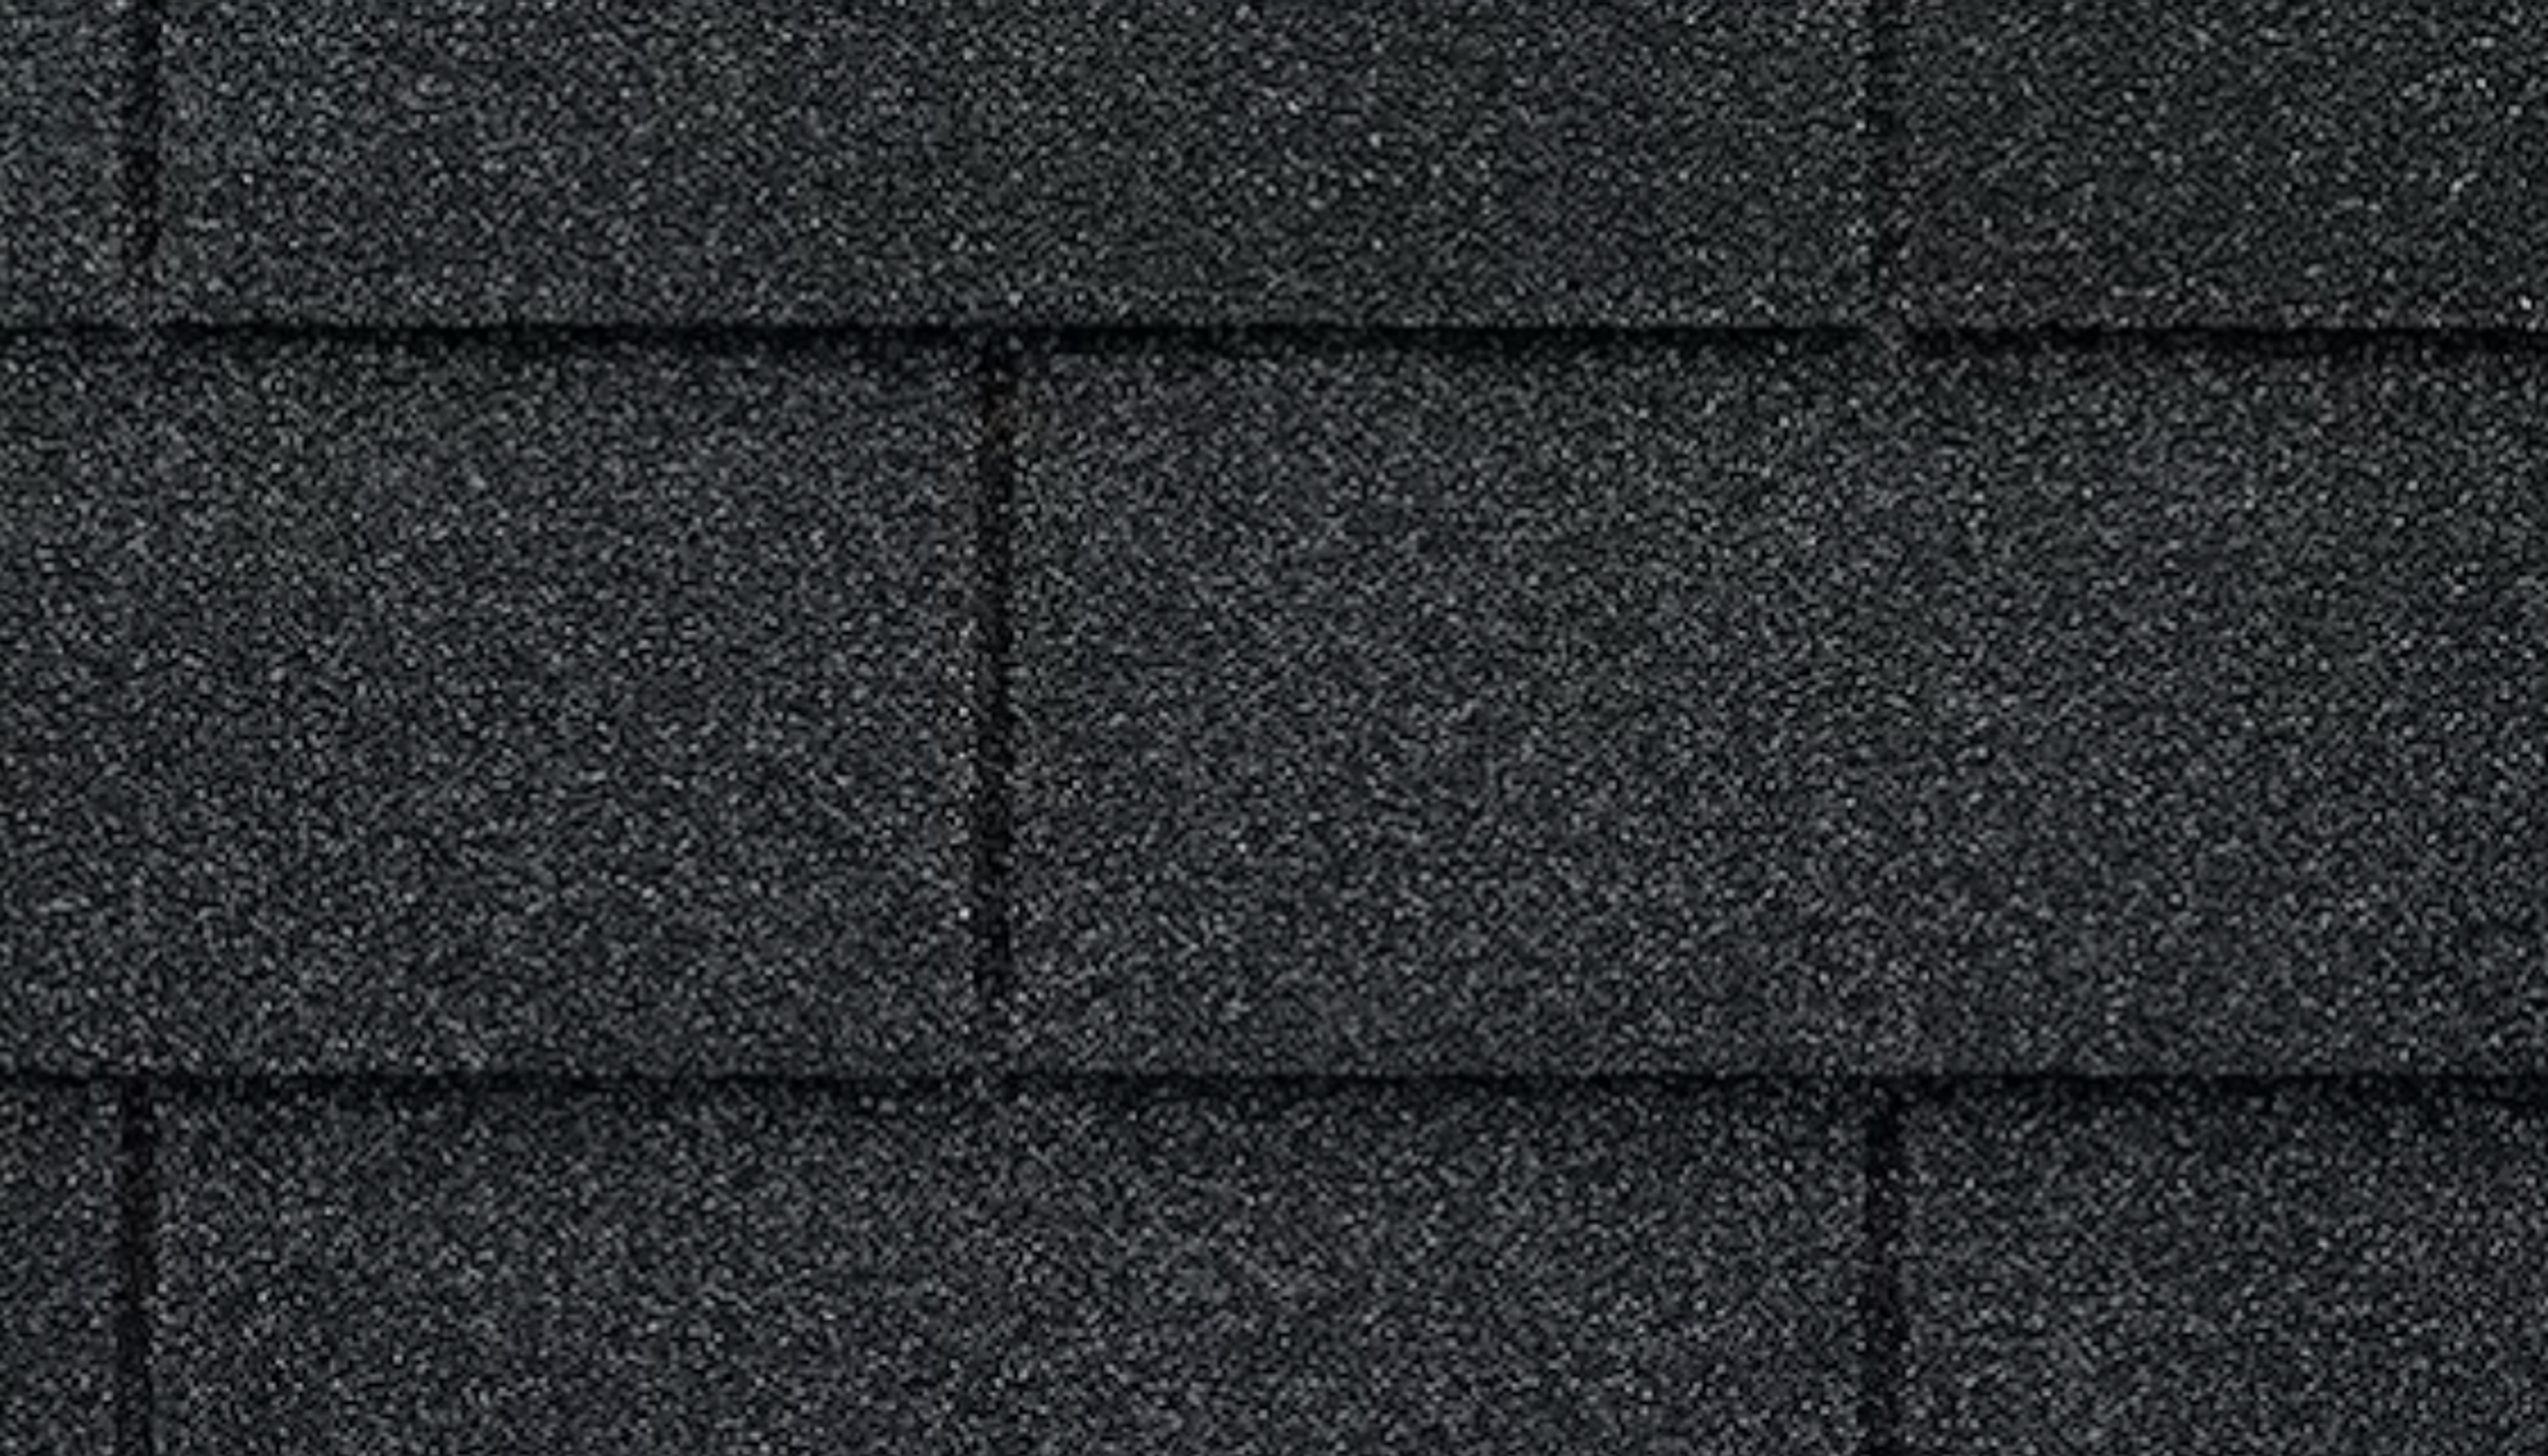 "Close-up of black shingled roof made of asphalt material, providing durable and weather-resistant roofing solution."